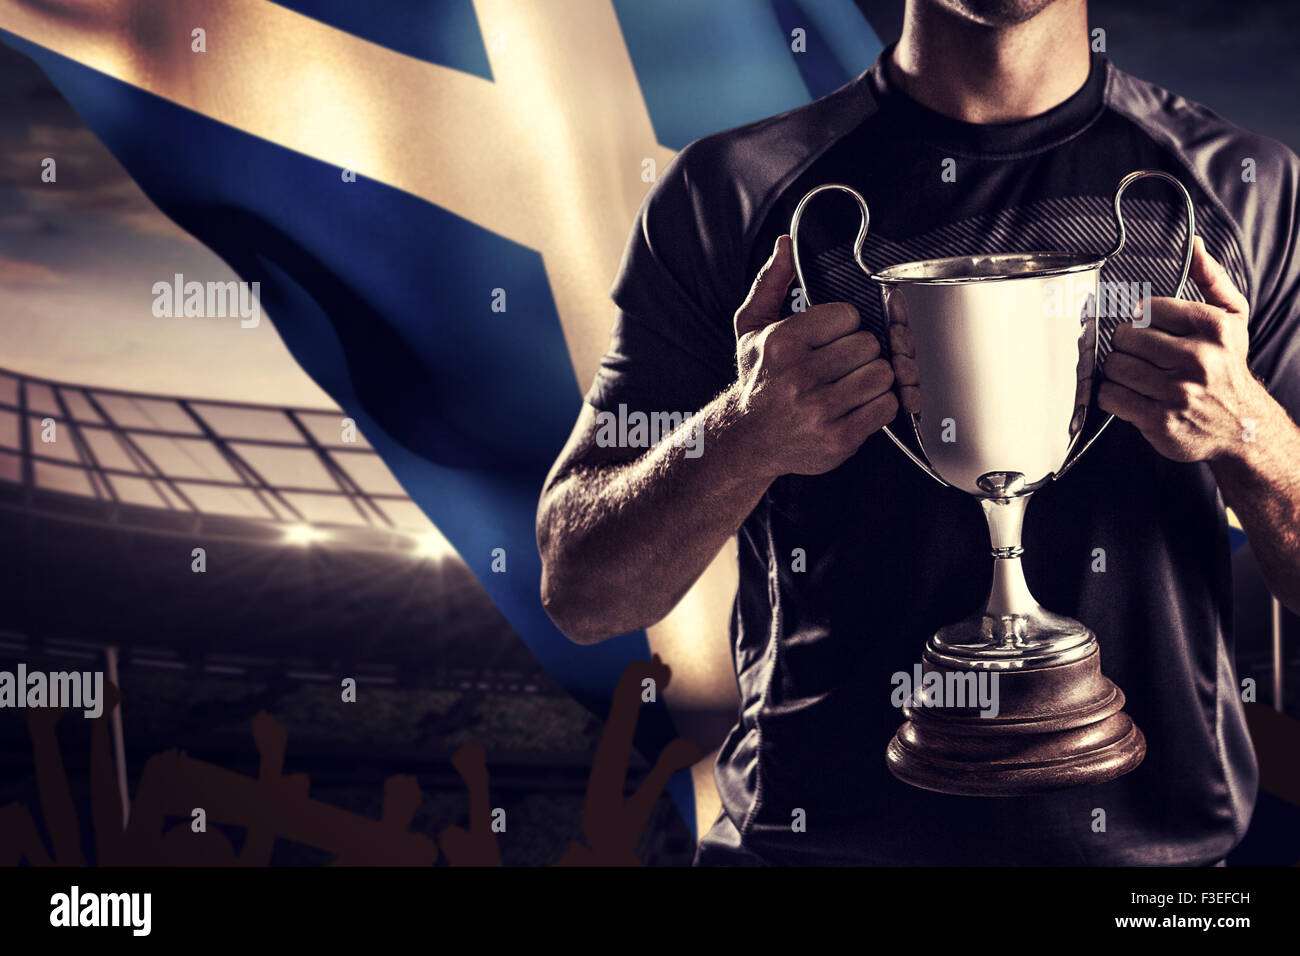 Composite image of victorious rugby player holding trophy Stock Photo